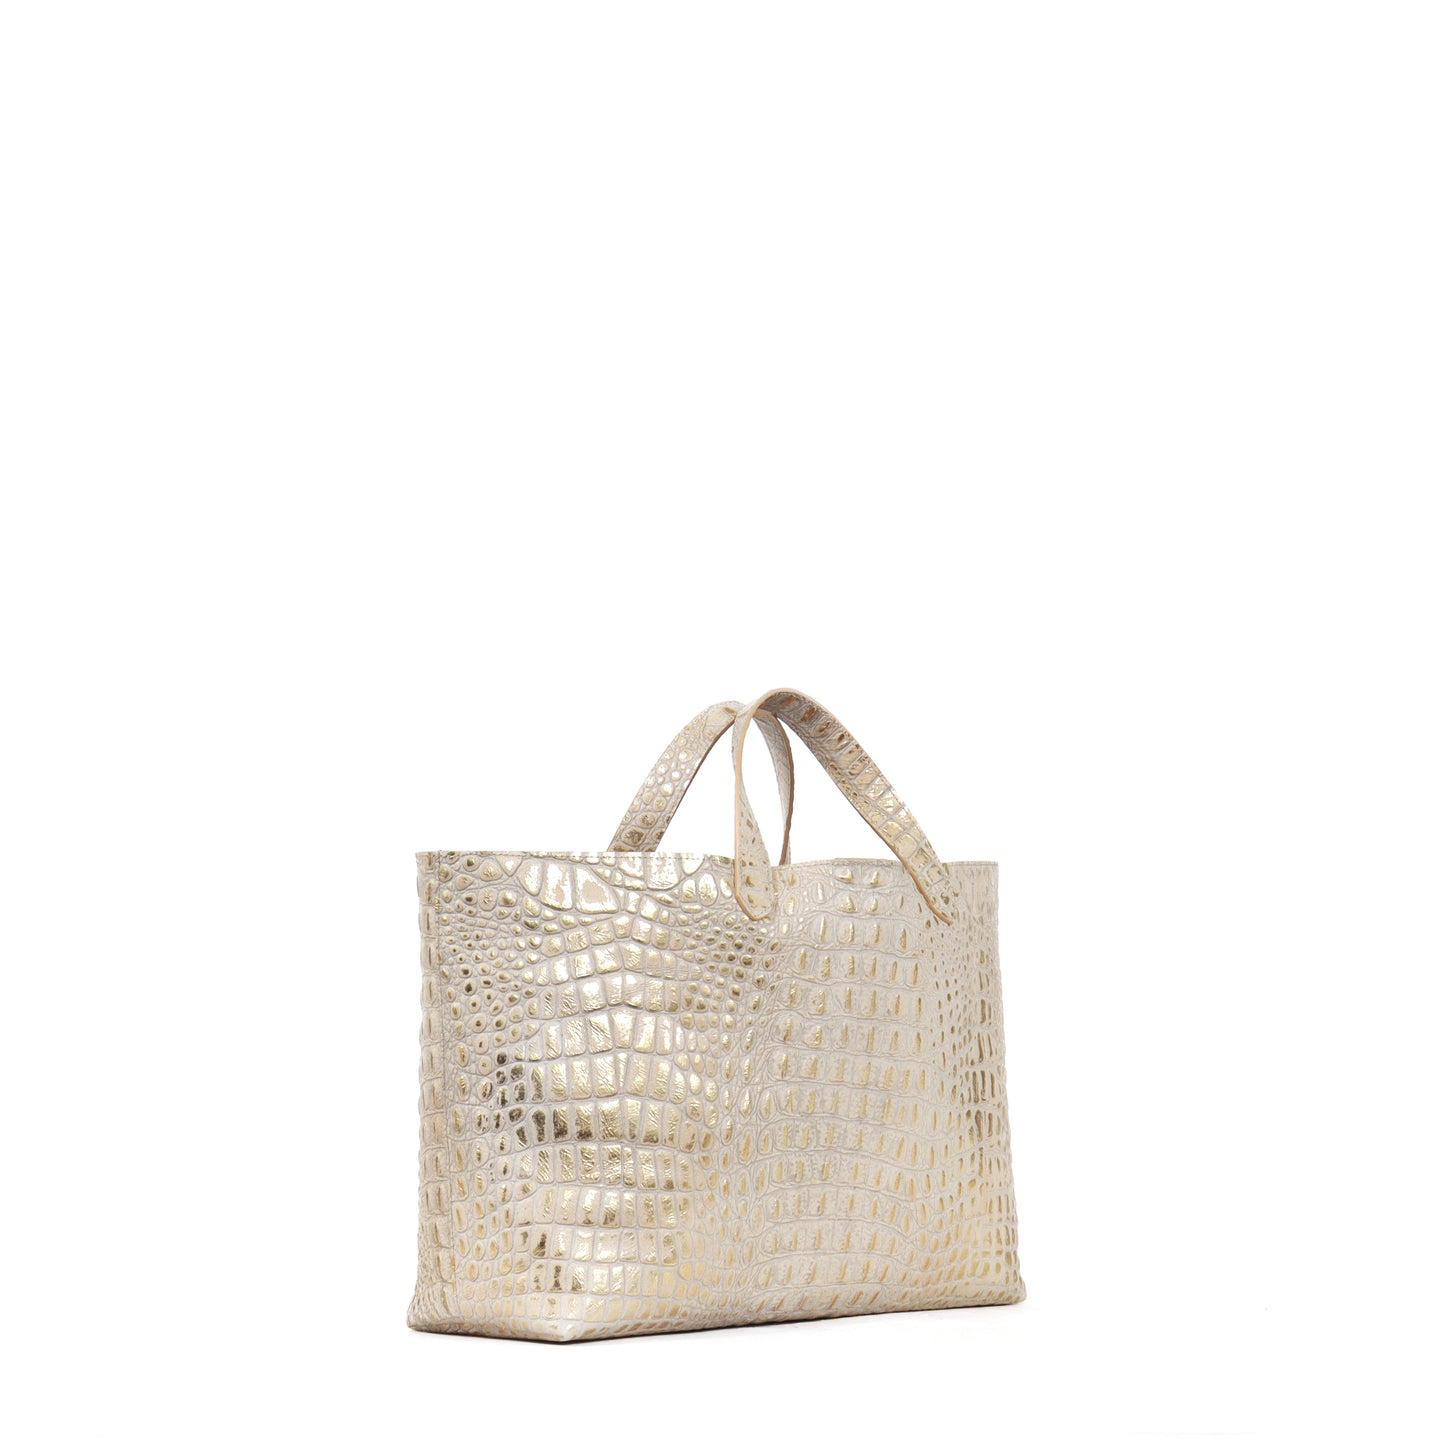 BEACH TOTE GOLD TIPPED EMBOSSED CROC